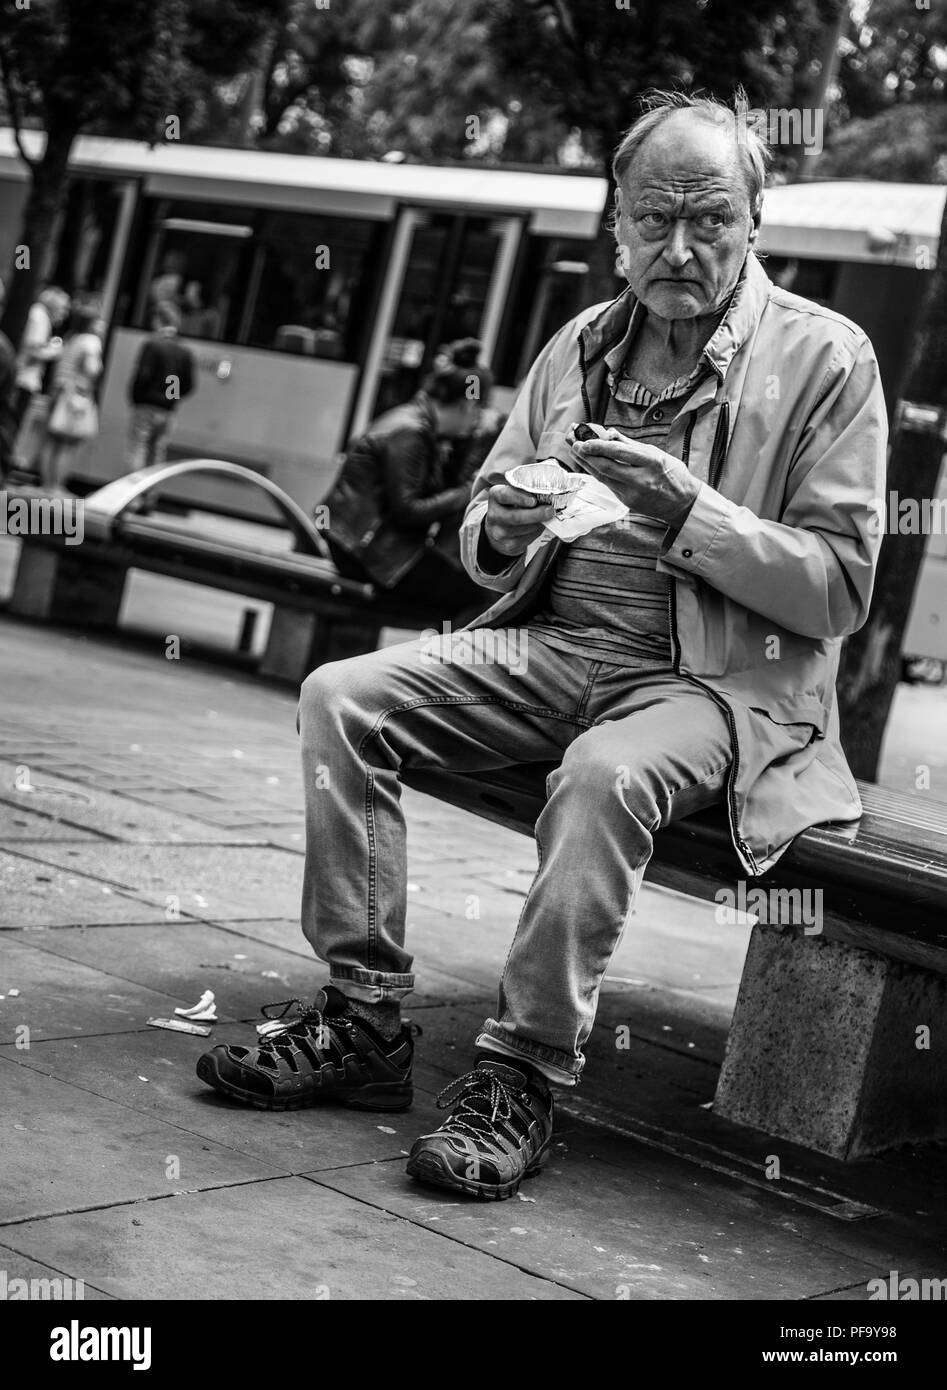 Man eats Pie on bench in Manchester City Centre, UK Stock Photo